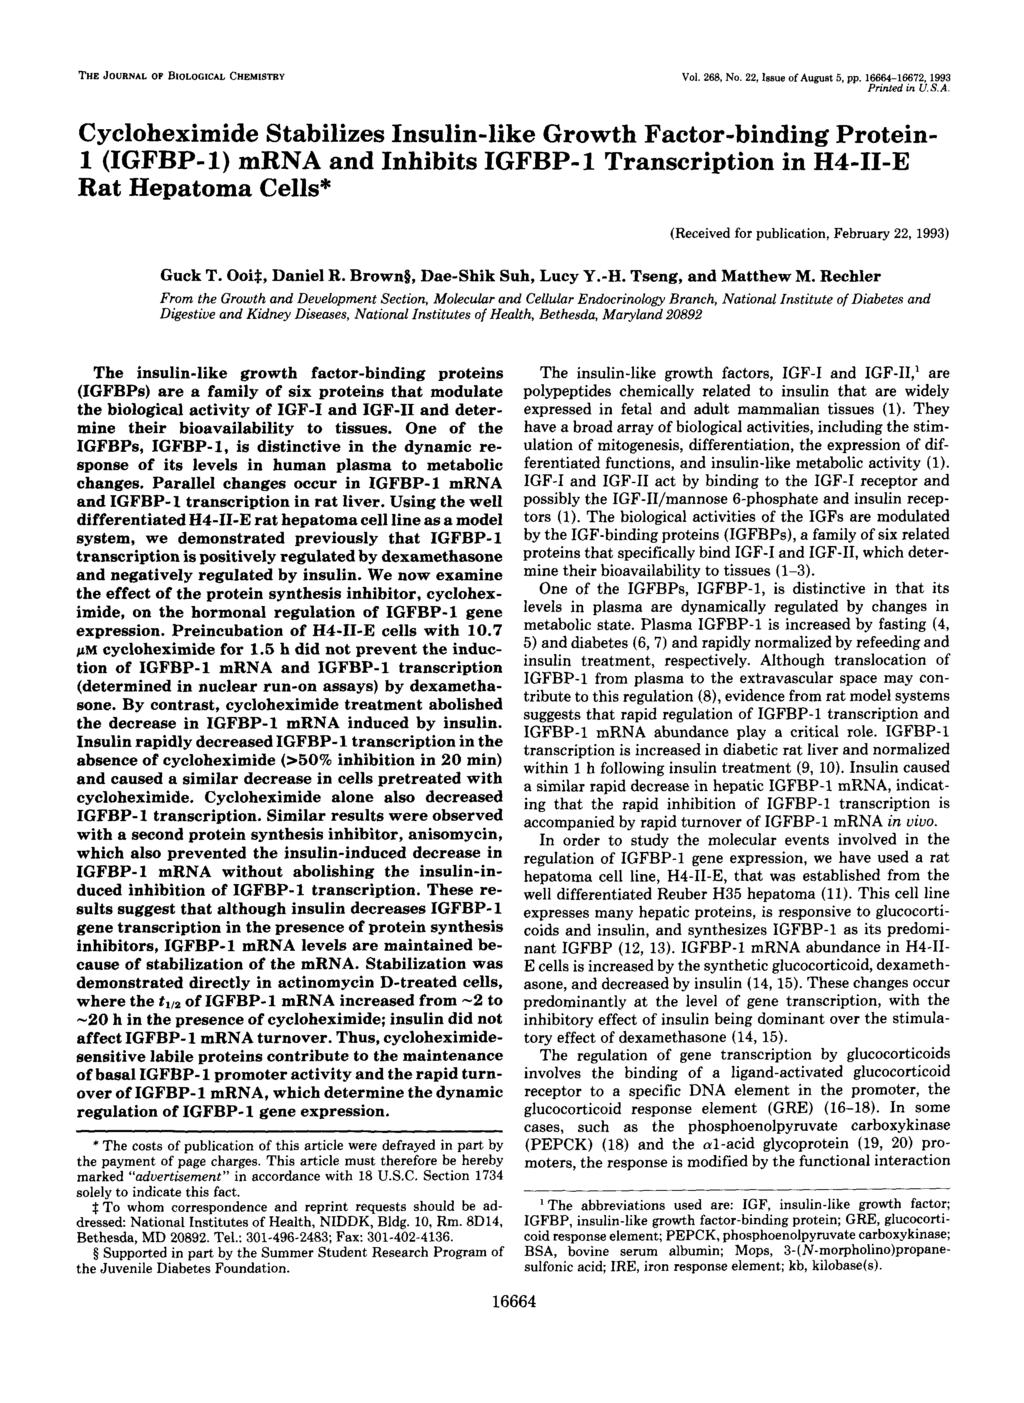 THE JOURNAL OF BOLOGCAL CHEMSTRY Vol. 68, No., ssue of Au